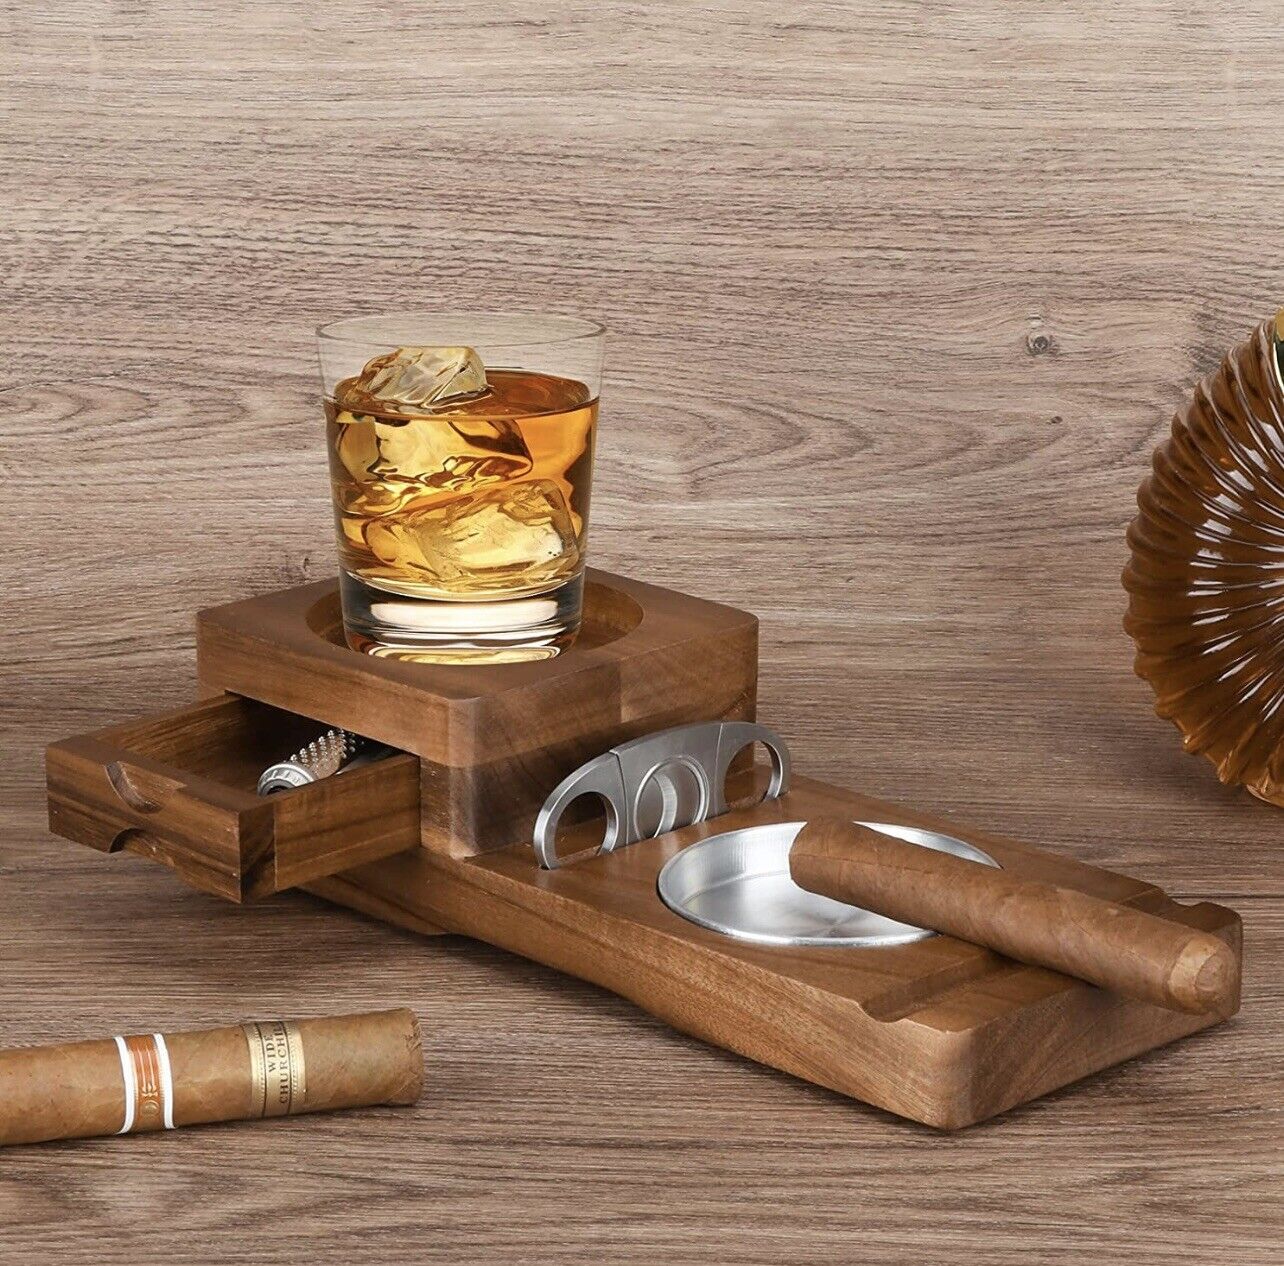 Luxury Cigar Ashtray With Whisky glass Holder Wooden Cigar Station W/CigarCutter